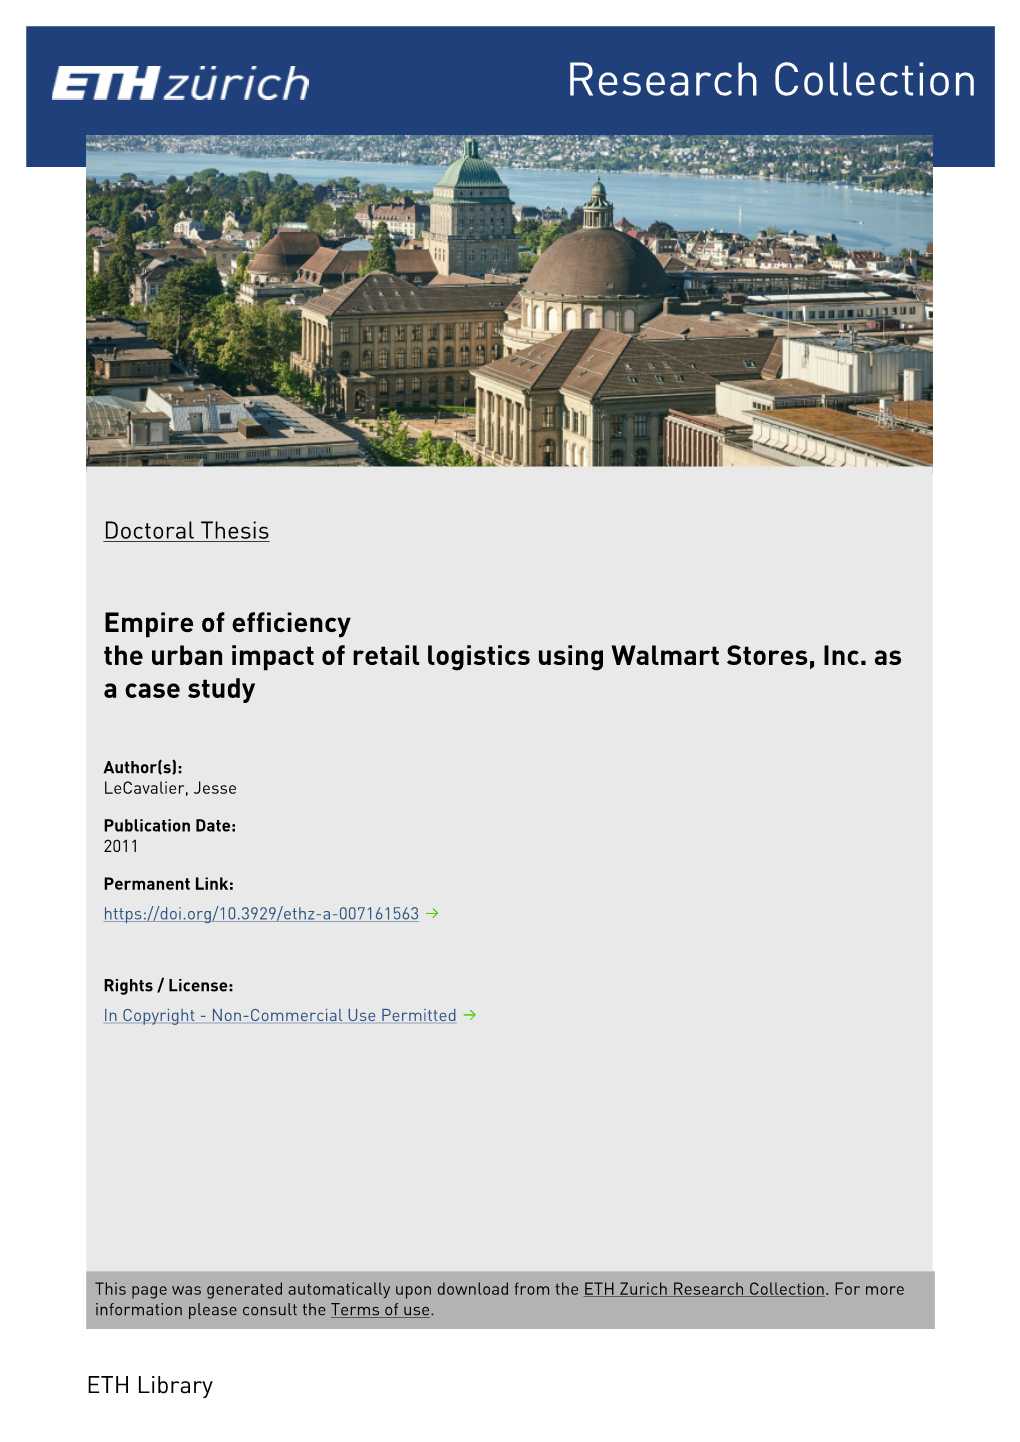 Empire of Efficiency the Urban Impact of Retail Logistics Using Walmart Stores, Inc. As a Case Study